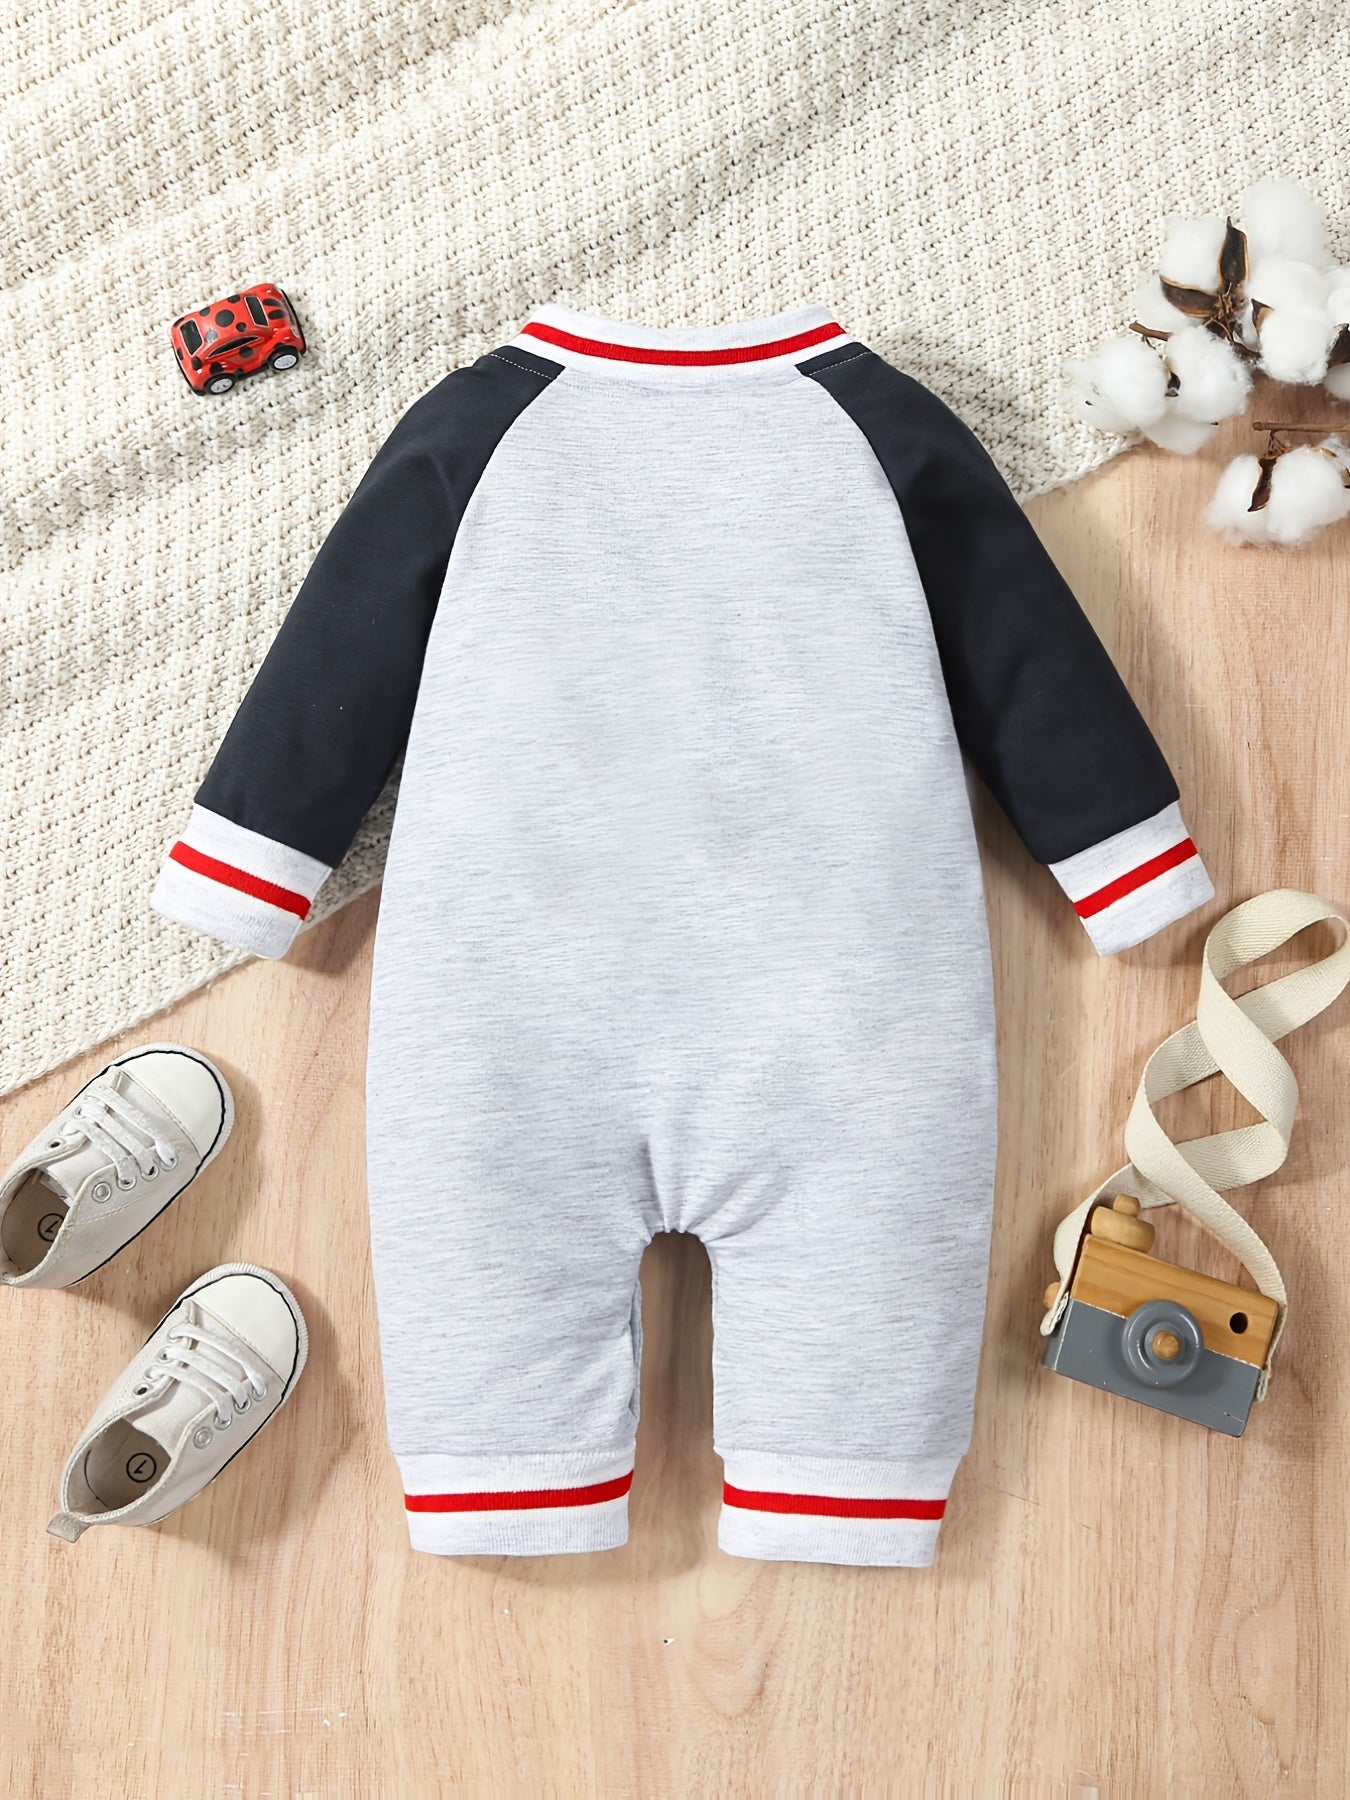 Baby Boy's Cute Thermal Romper With Letter Print For Spring Fall Party